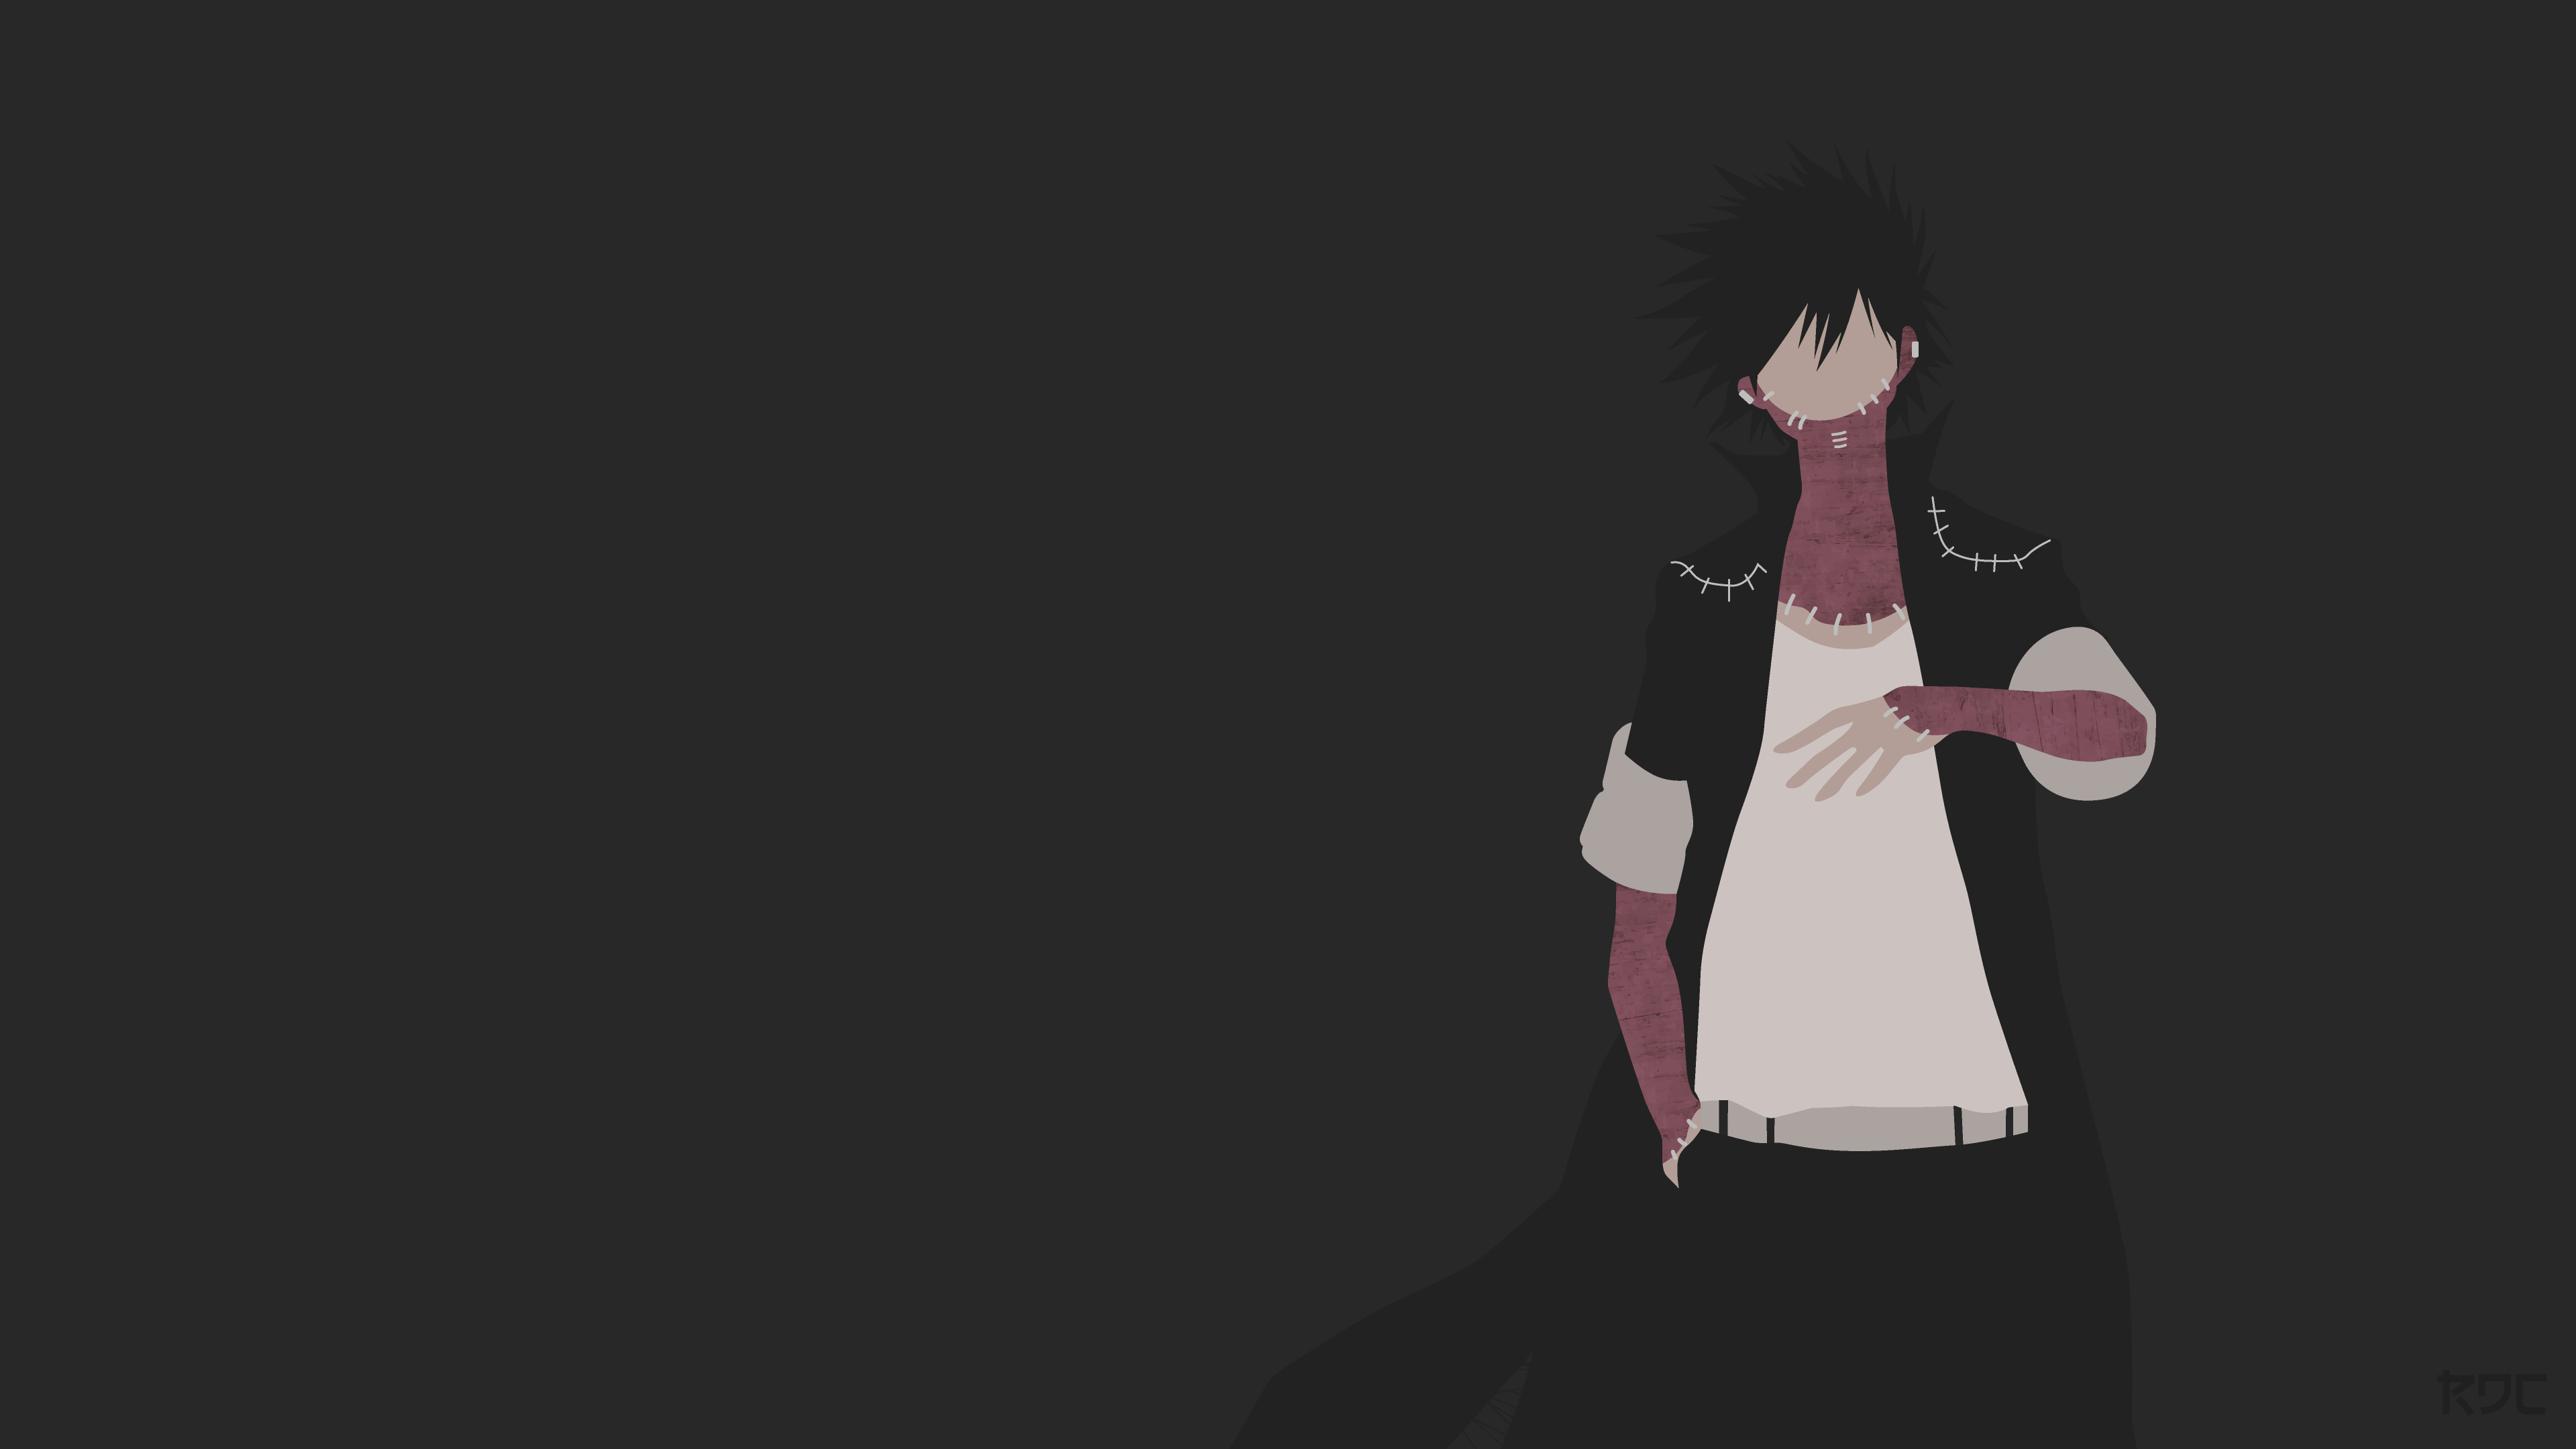 10 Selected dabi wallpaper aesthetic laptop You Can Save It Free Of ...